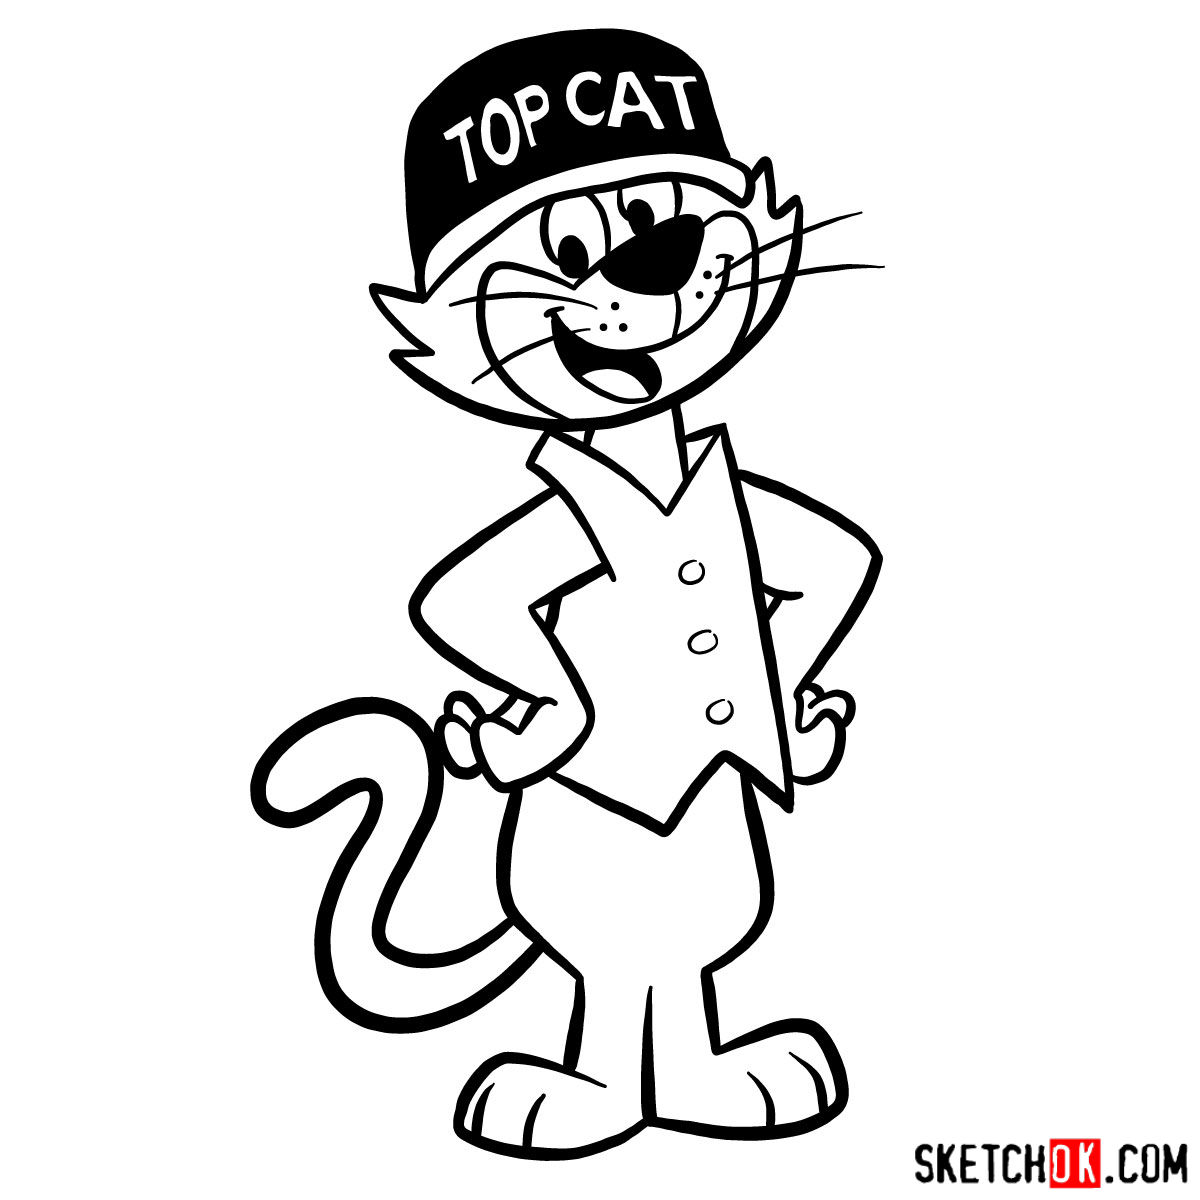 How to draw Top Cat - step 11